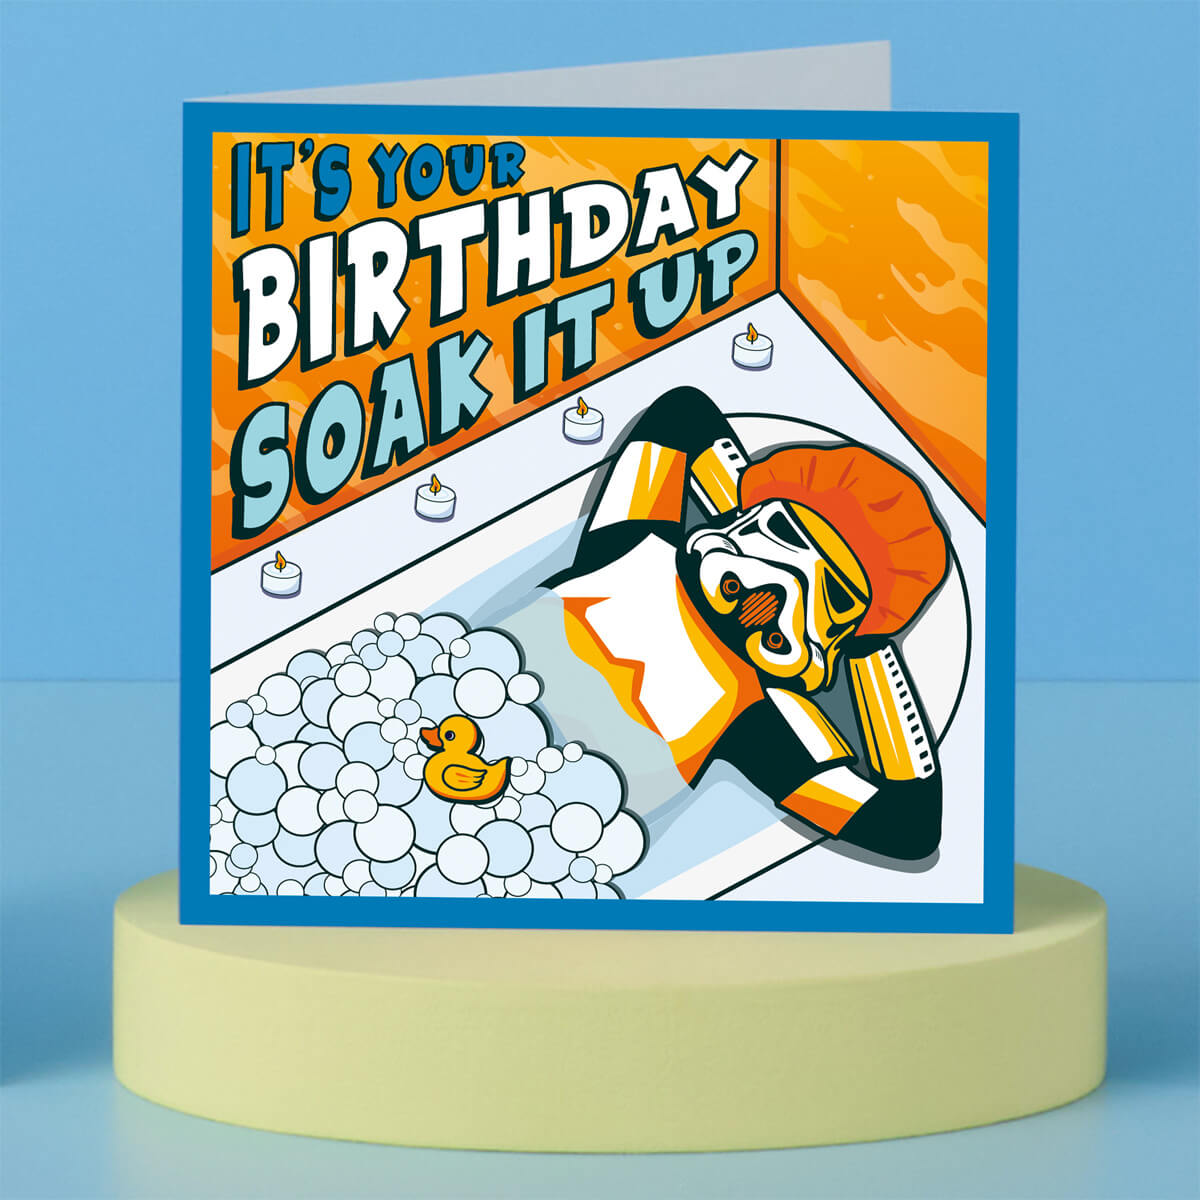 Original Stormtrooper - Its Your Birthday Soak It Up Card for Star Wars fans - officially licensed by Cardology